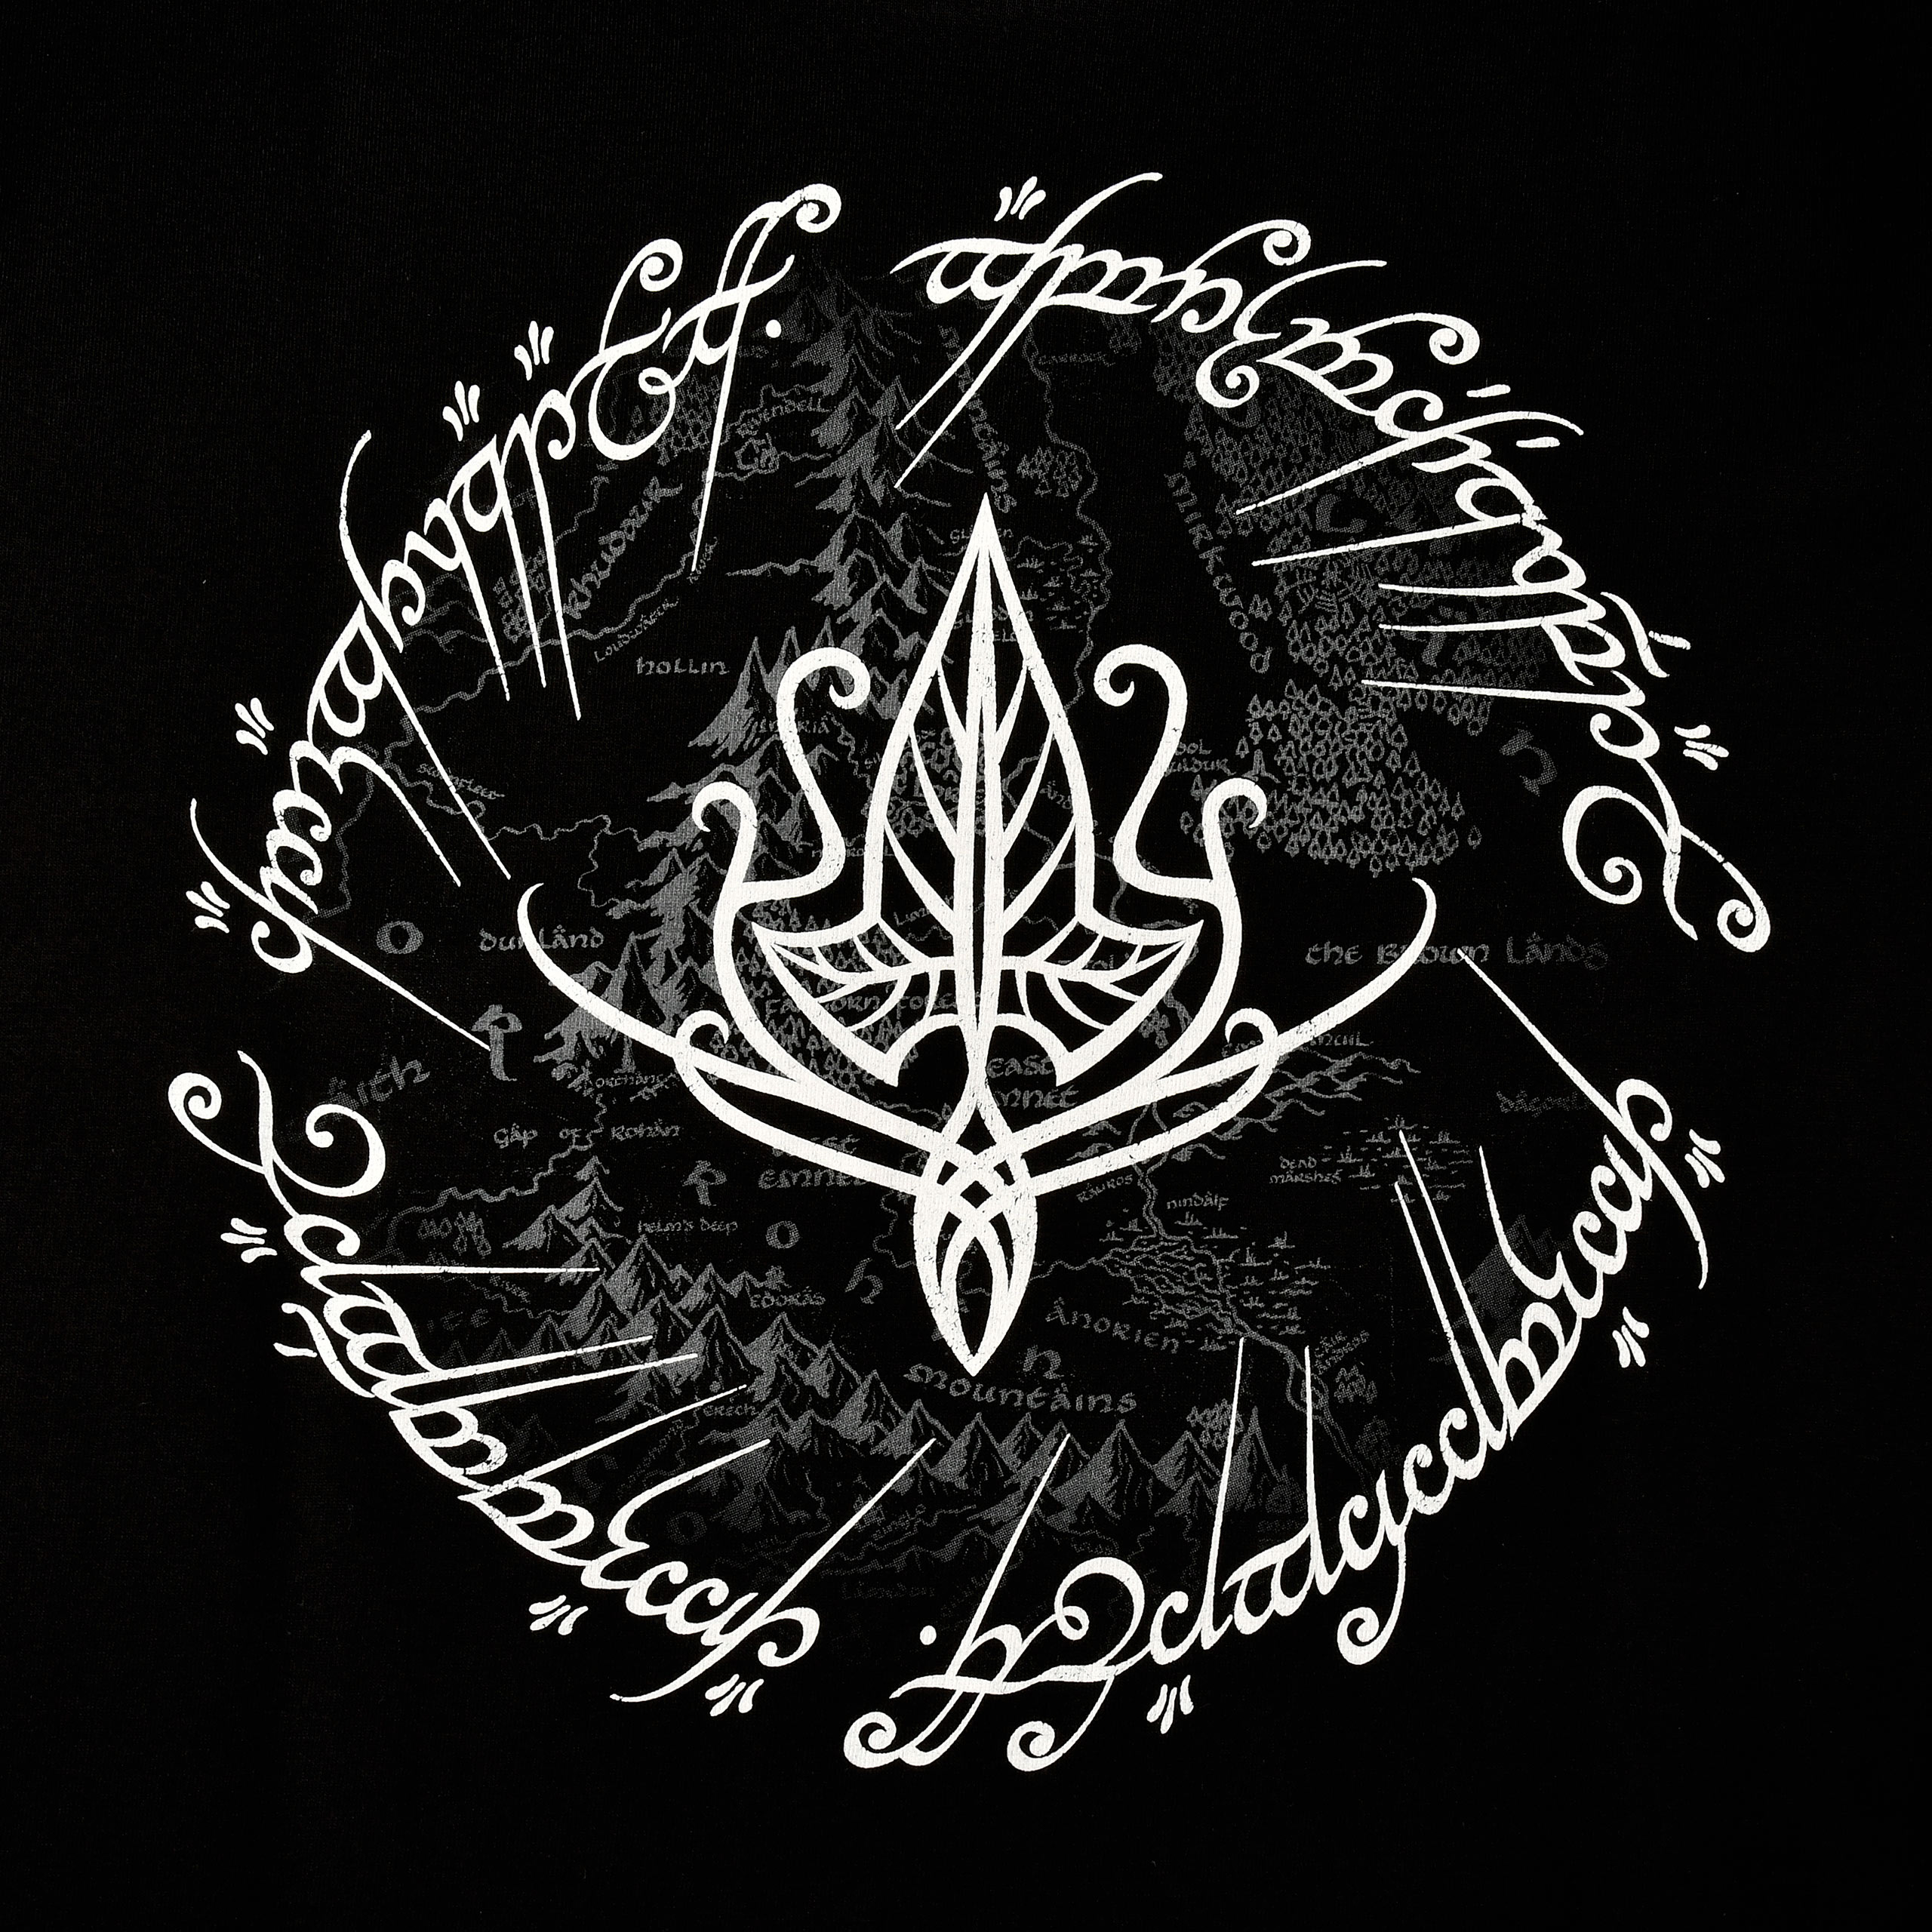 Lord of the Rings - Elven Leaf T-Shirt black